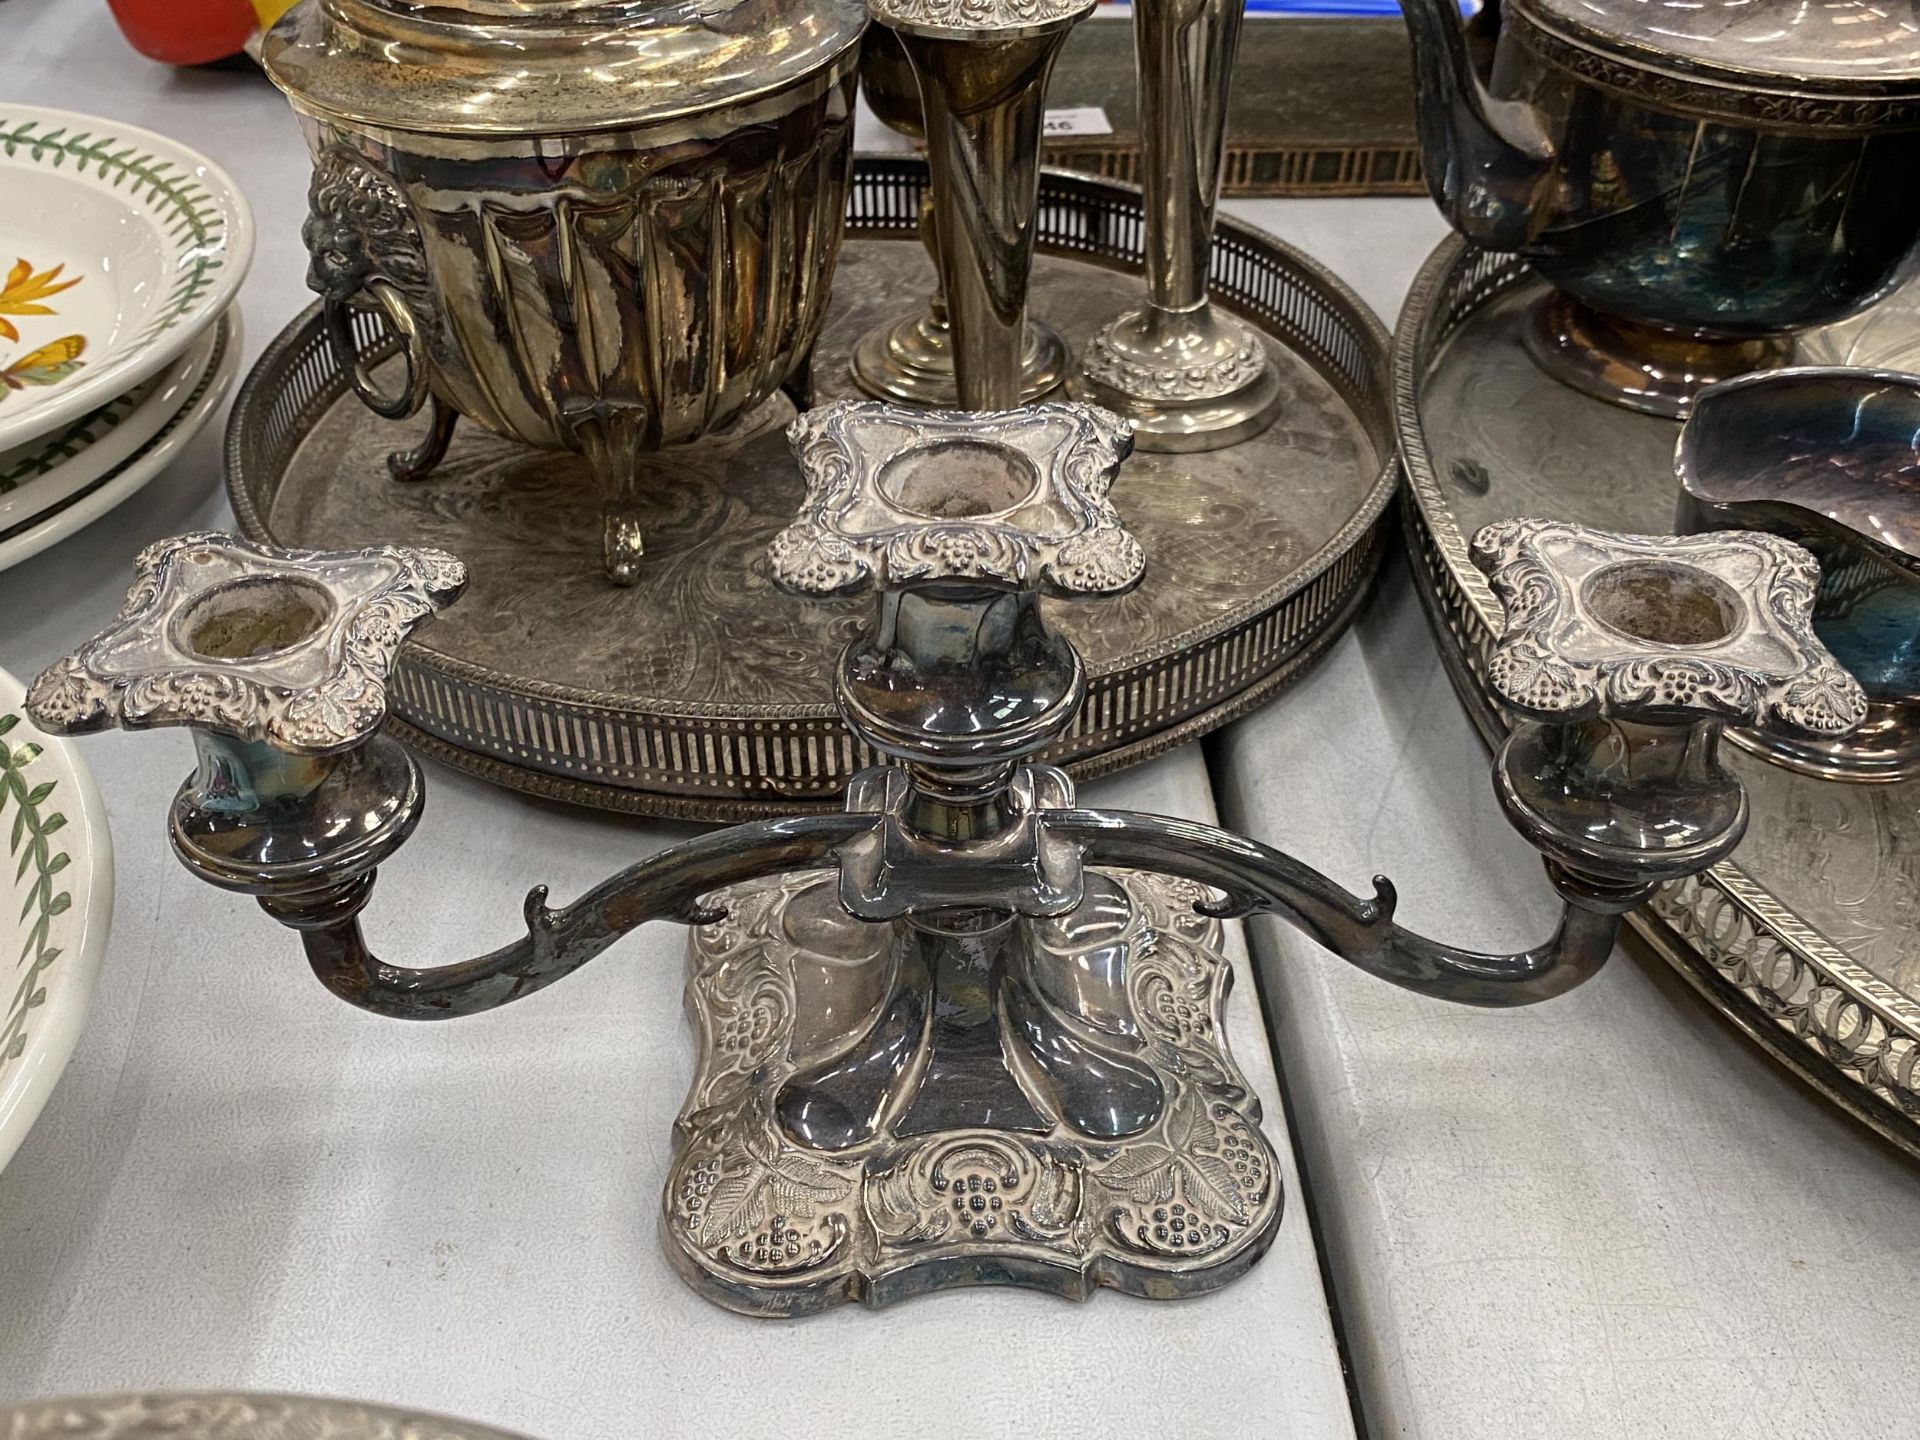 A LARGE QUANTITY OF SILVER PLATED ITEMS TO INCLUDE GALLERIED TRAYS, A ROSE BOWL, TEAPOTS, VASES, - Image 5 of 5